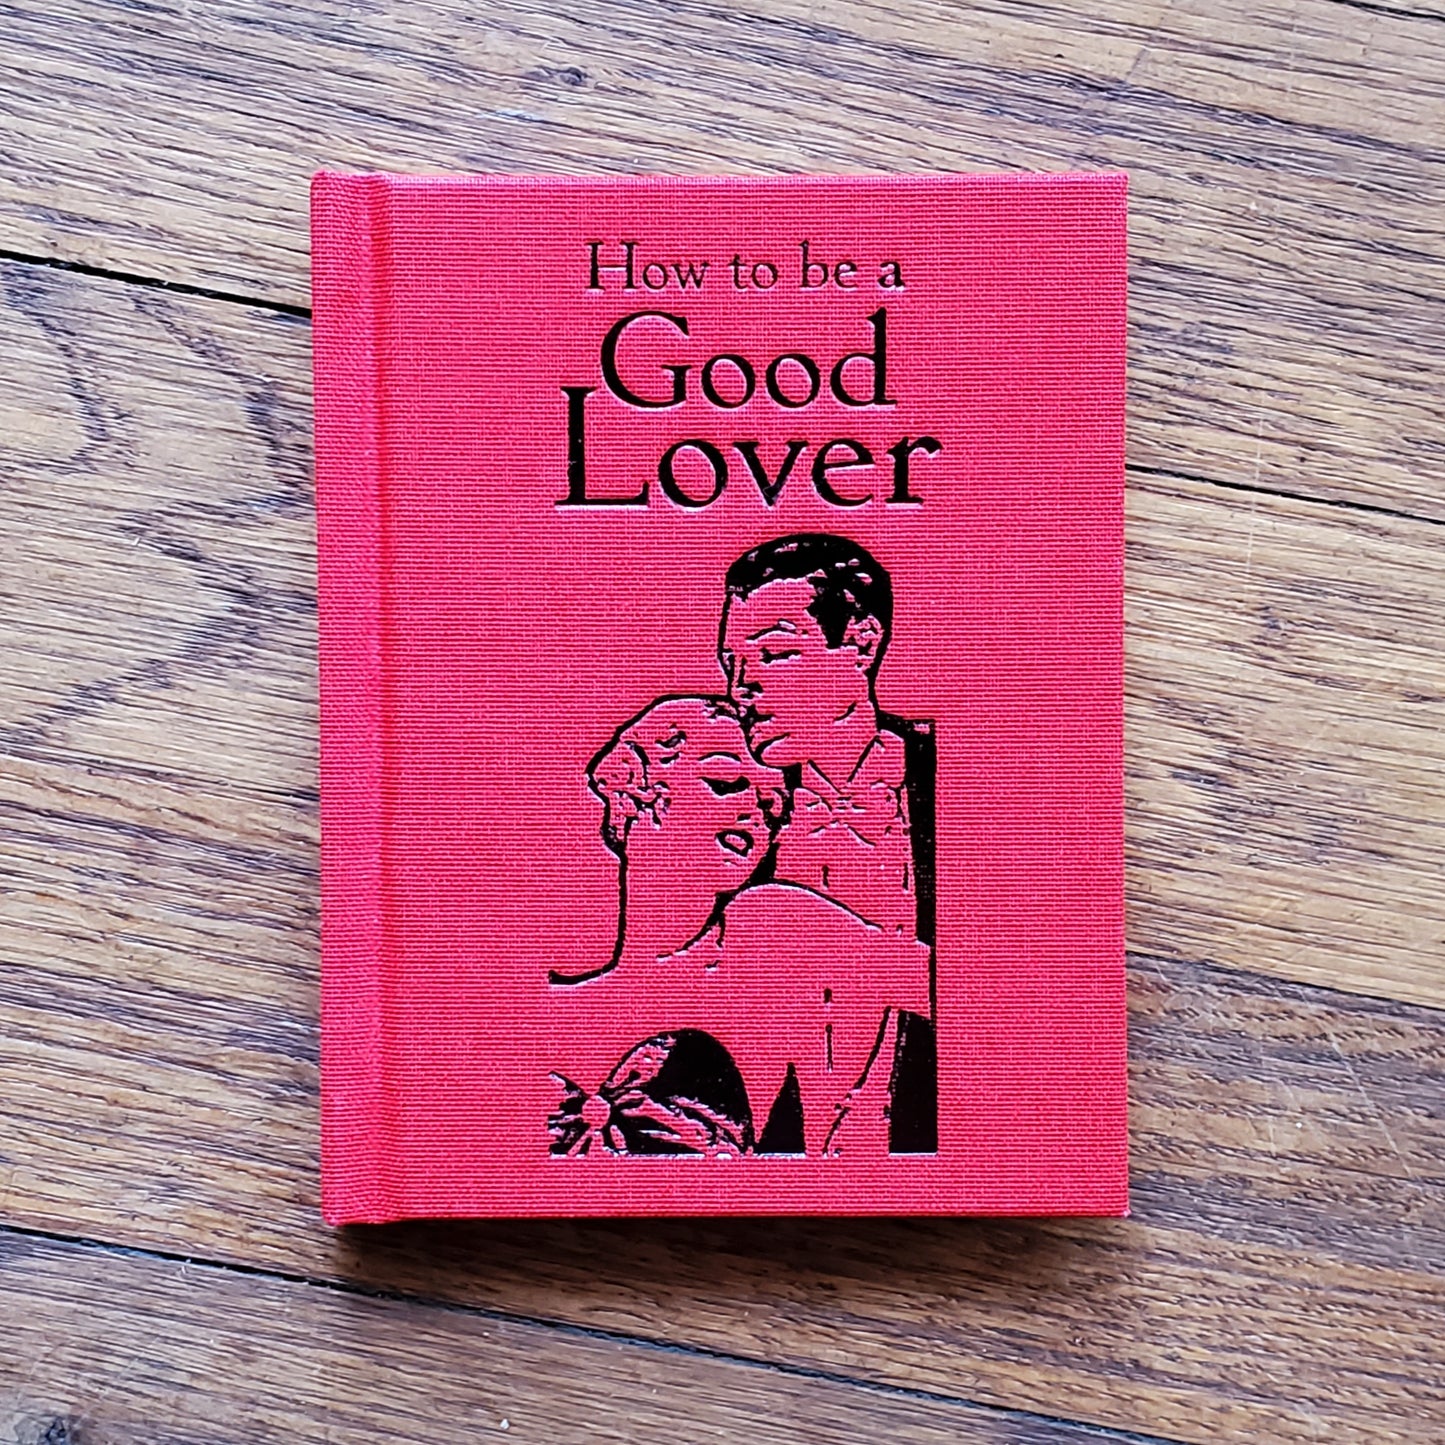 How to be a Good Lover